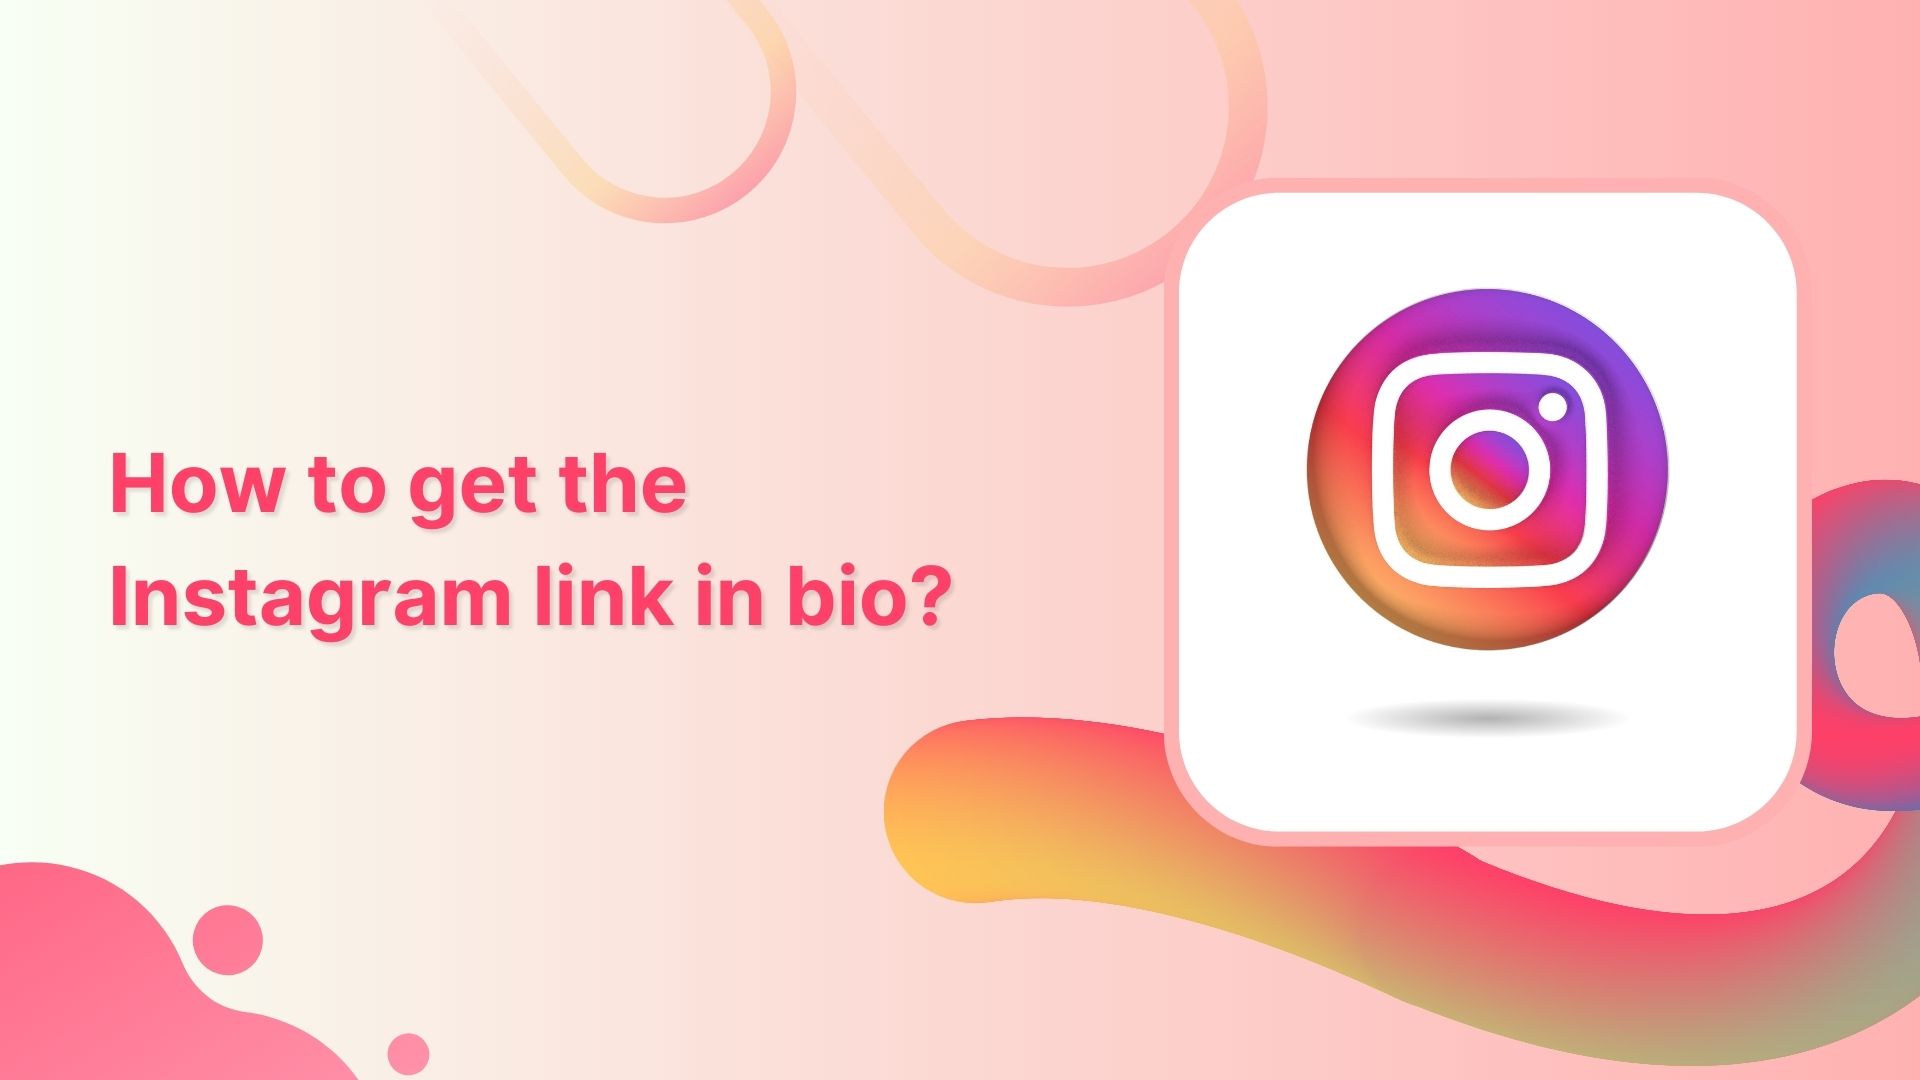 How to get to the Instagram link in bio